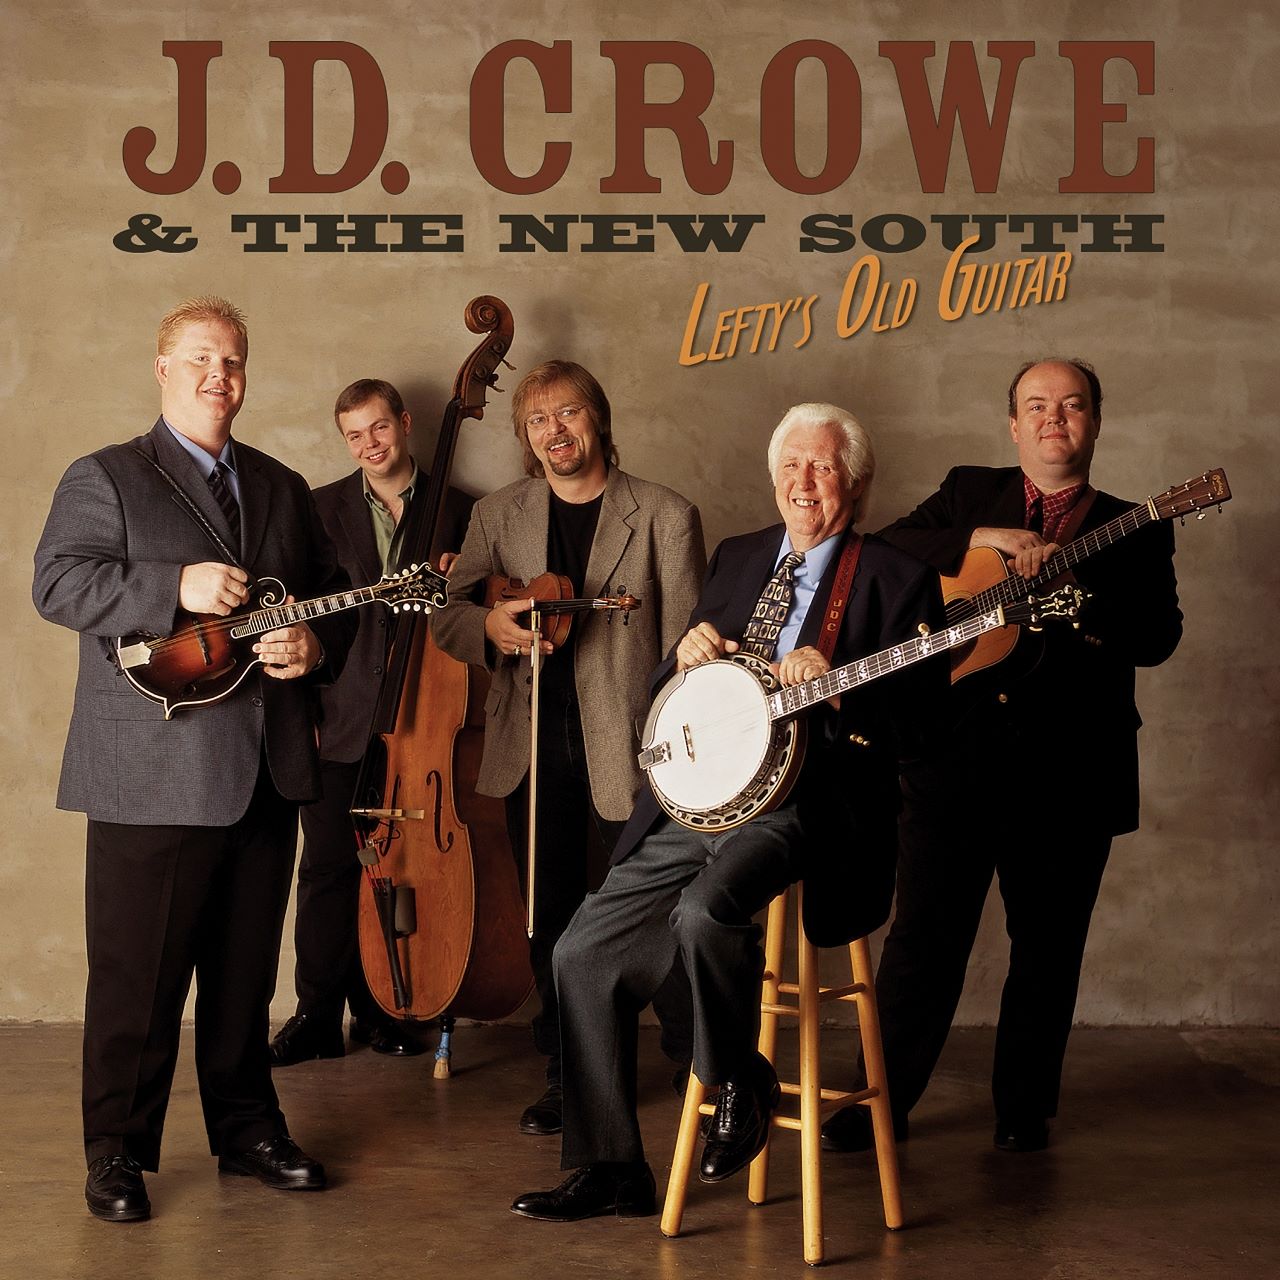 J. D. Crowe & The New South - Lefty’s Old Guitar cover album